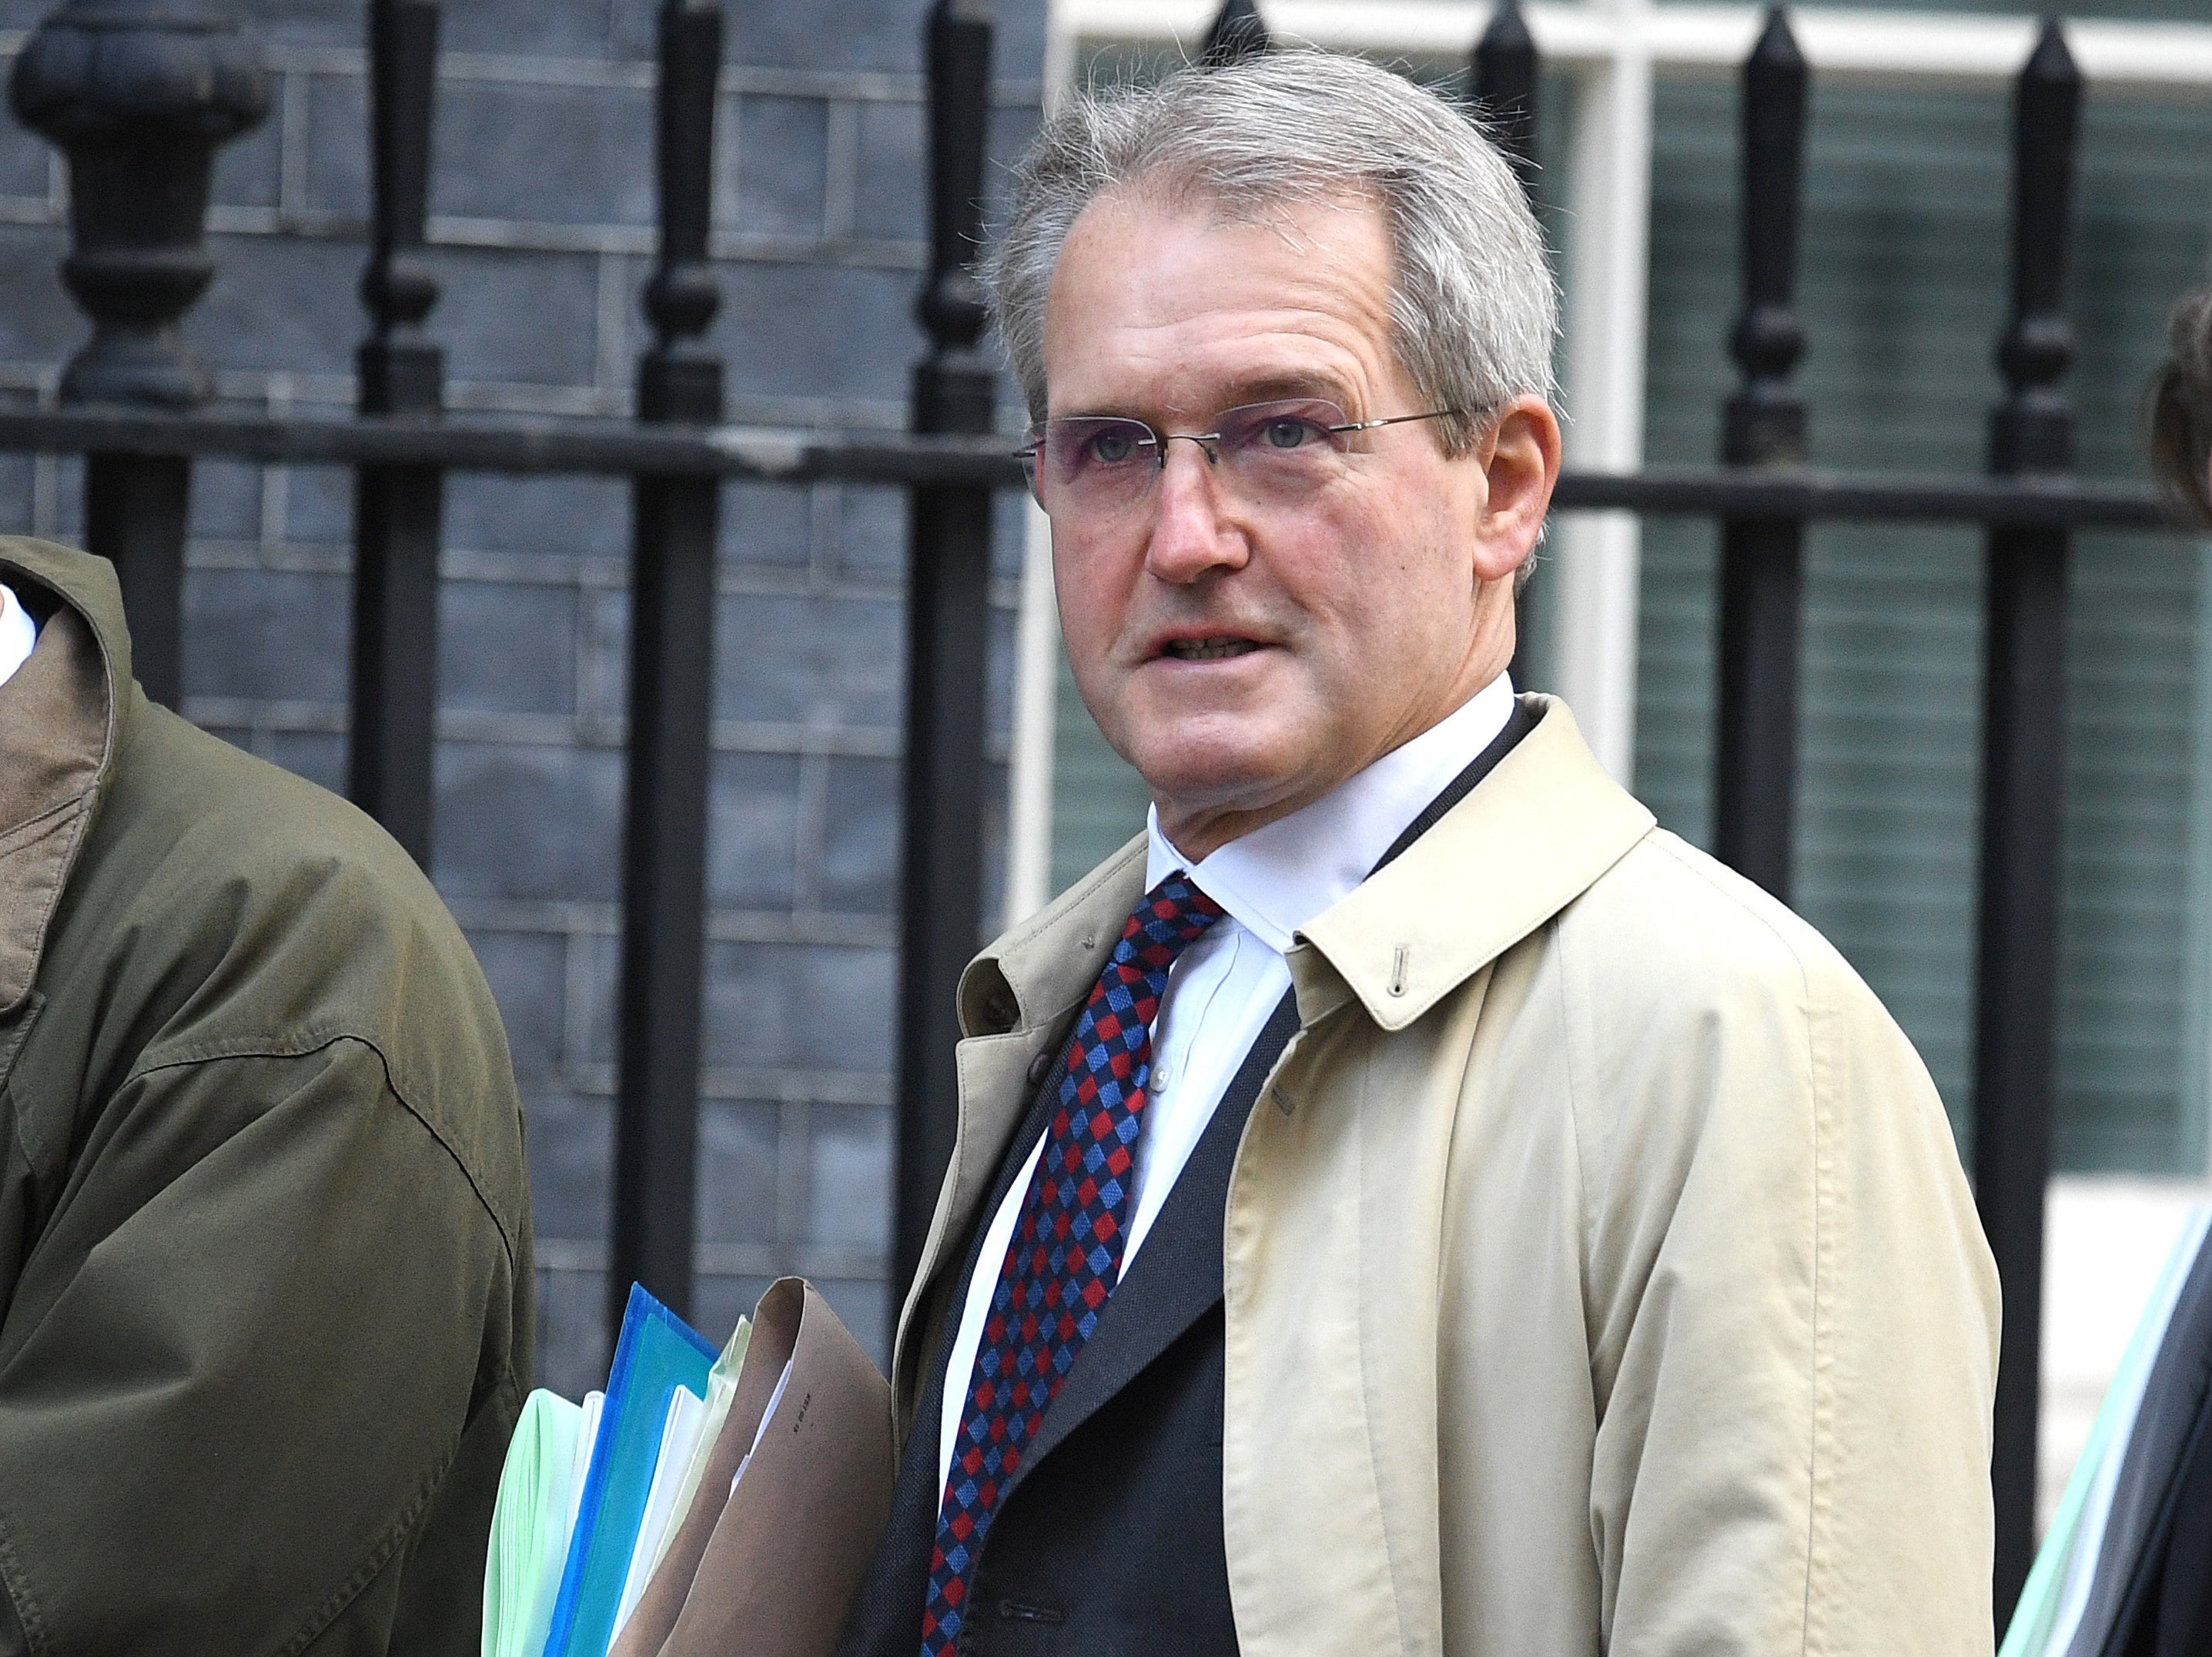 Owen Paterson resigned as an MP this week following lobbying allegations